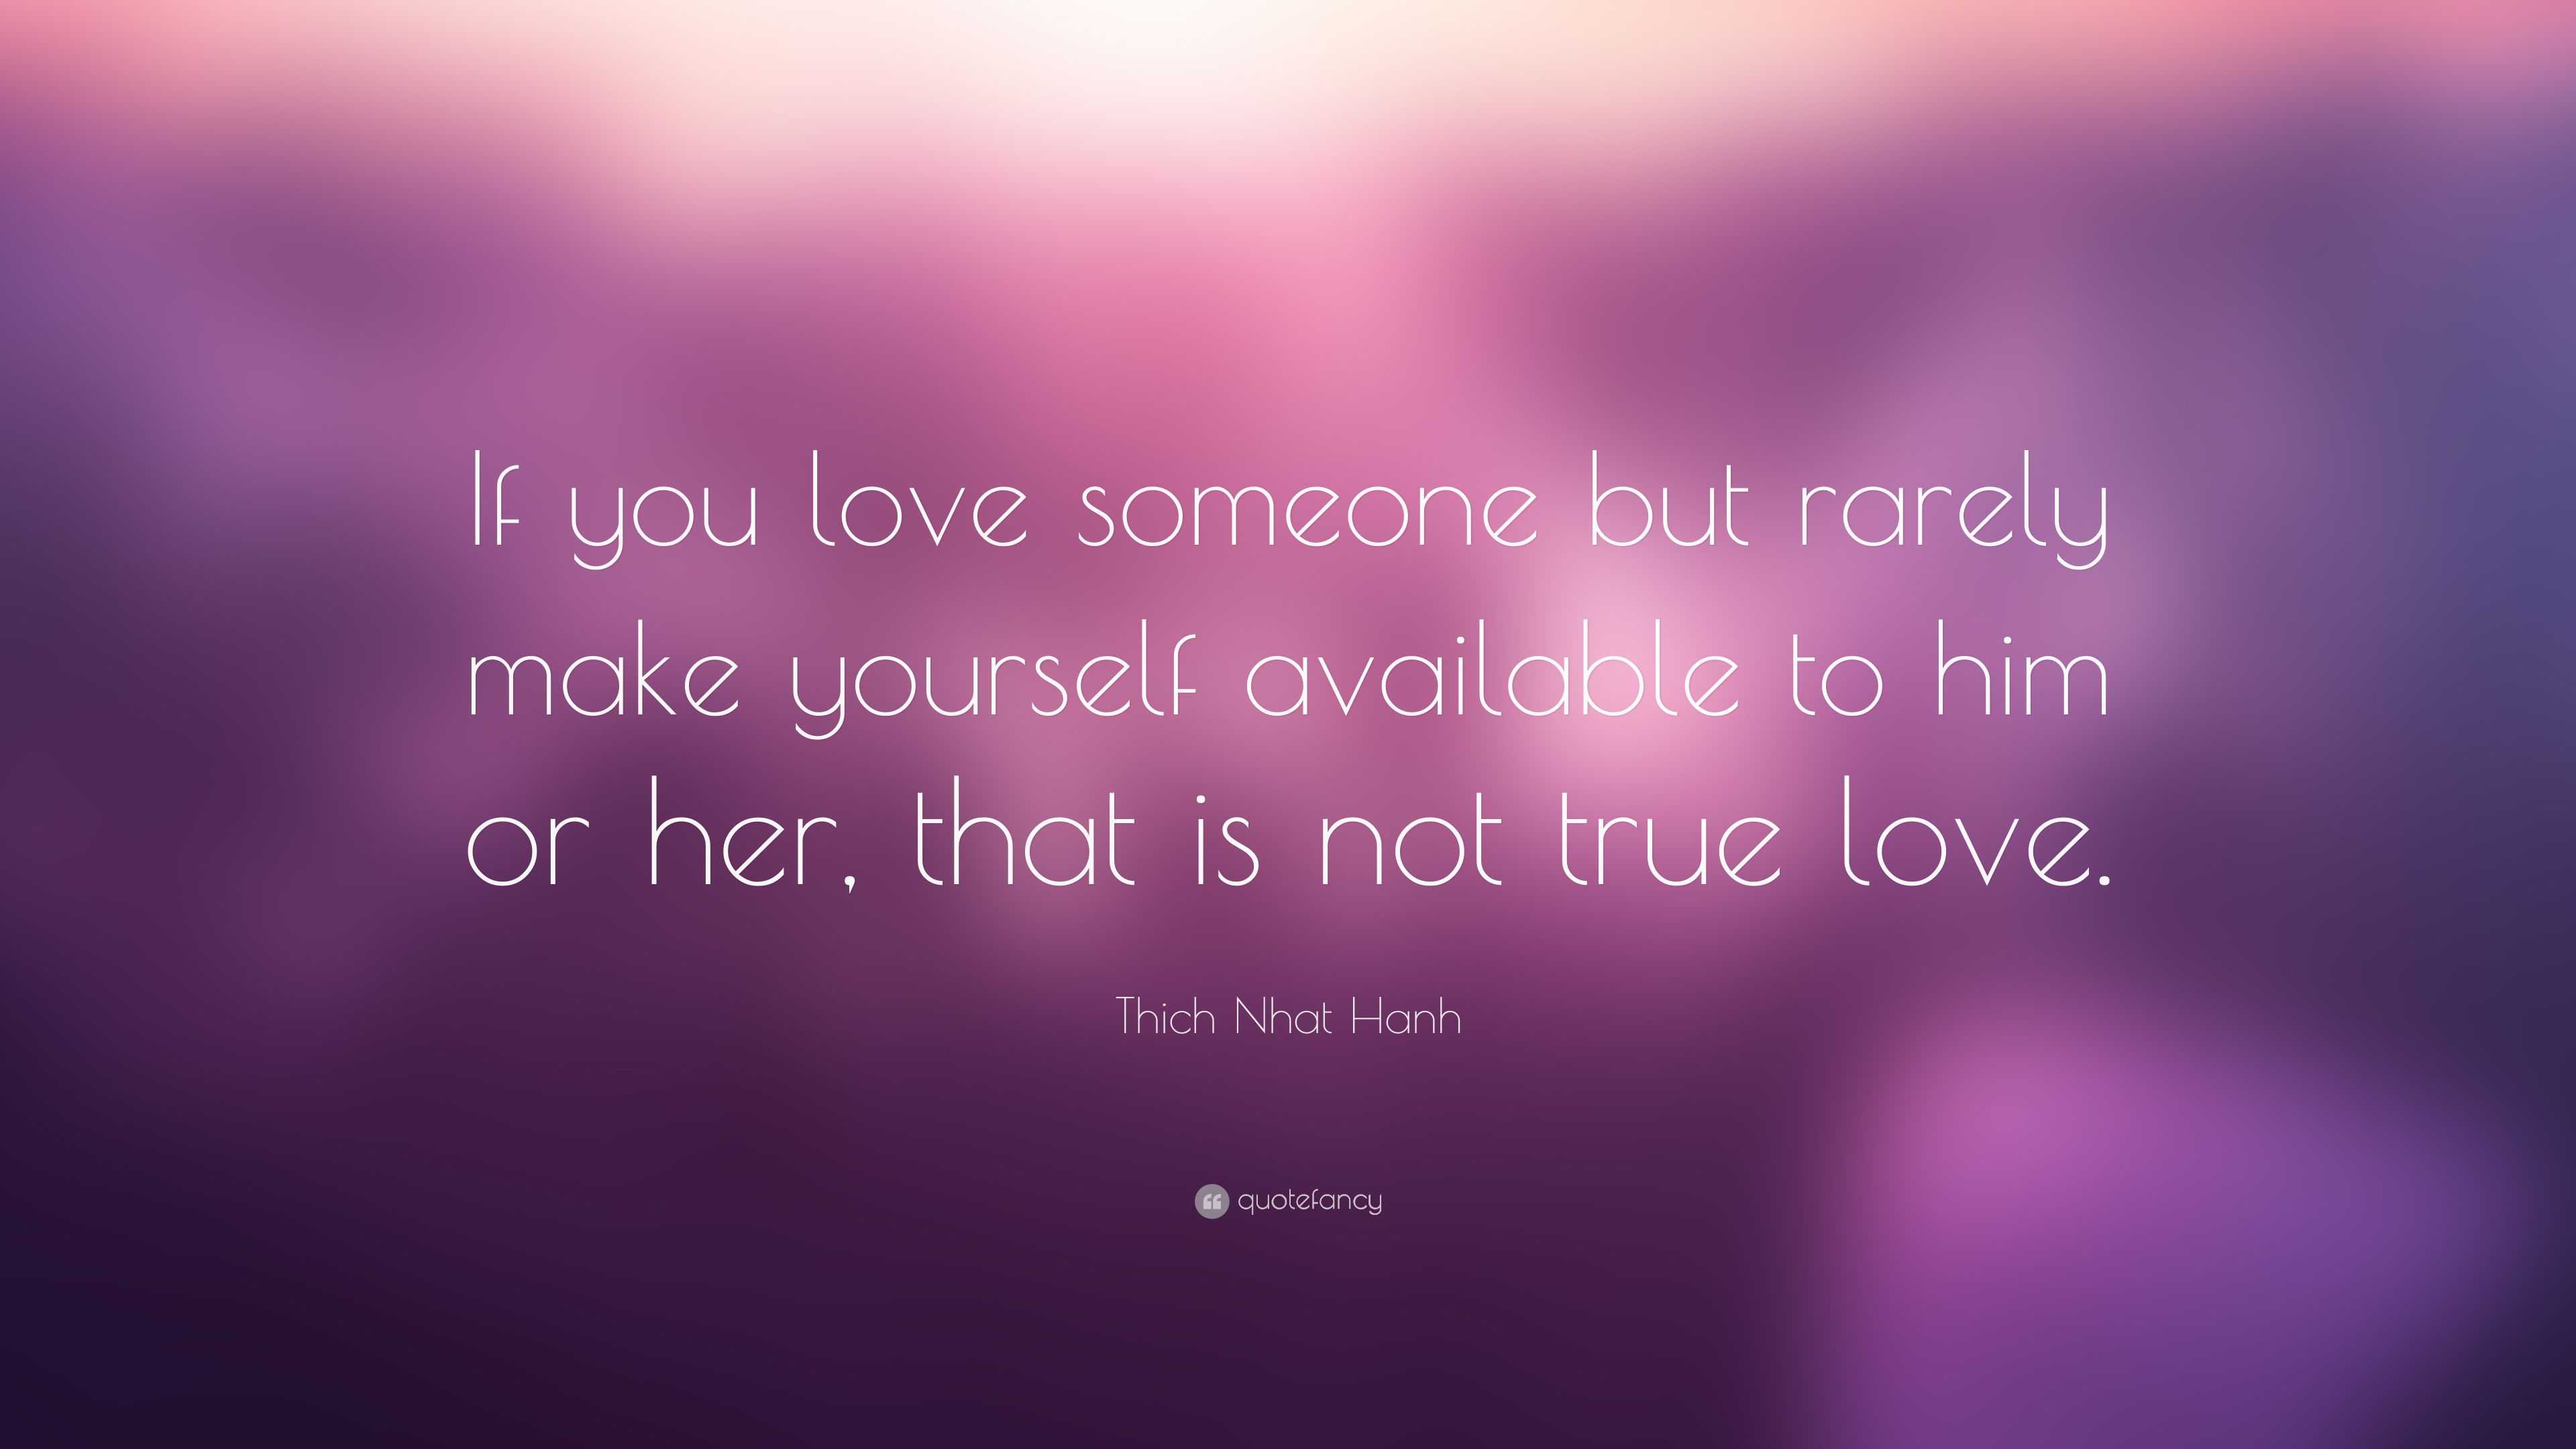 Thich Nhat Hanh Quote: “If you love someone but rarely make yourself ...